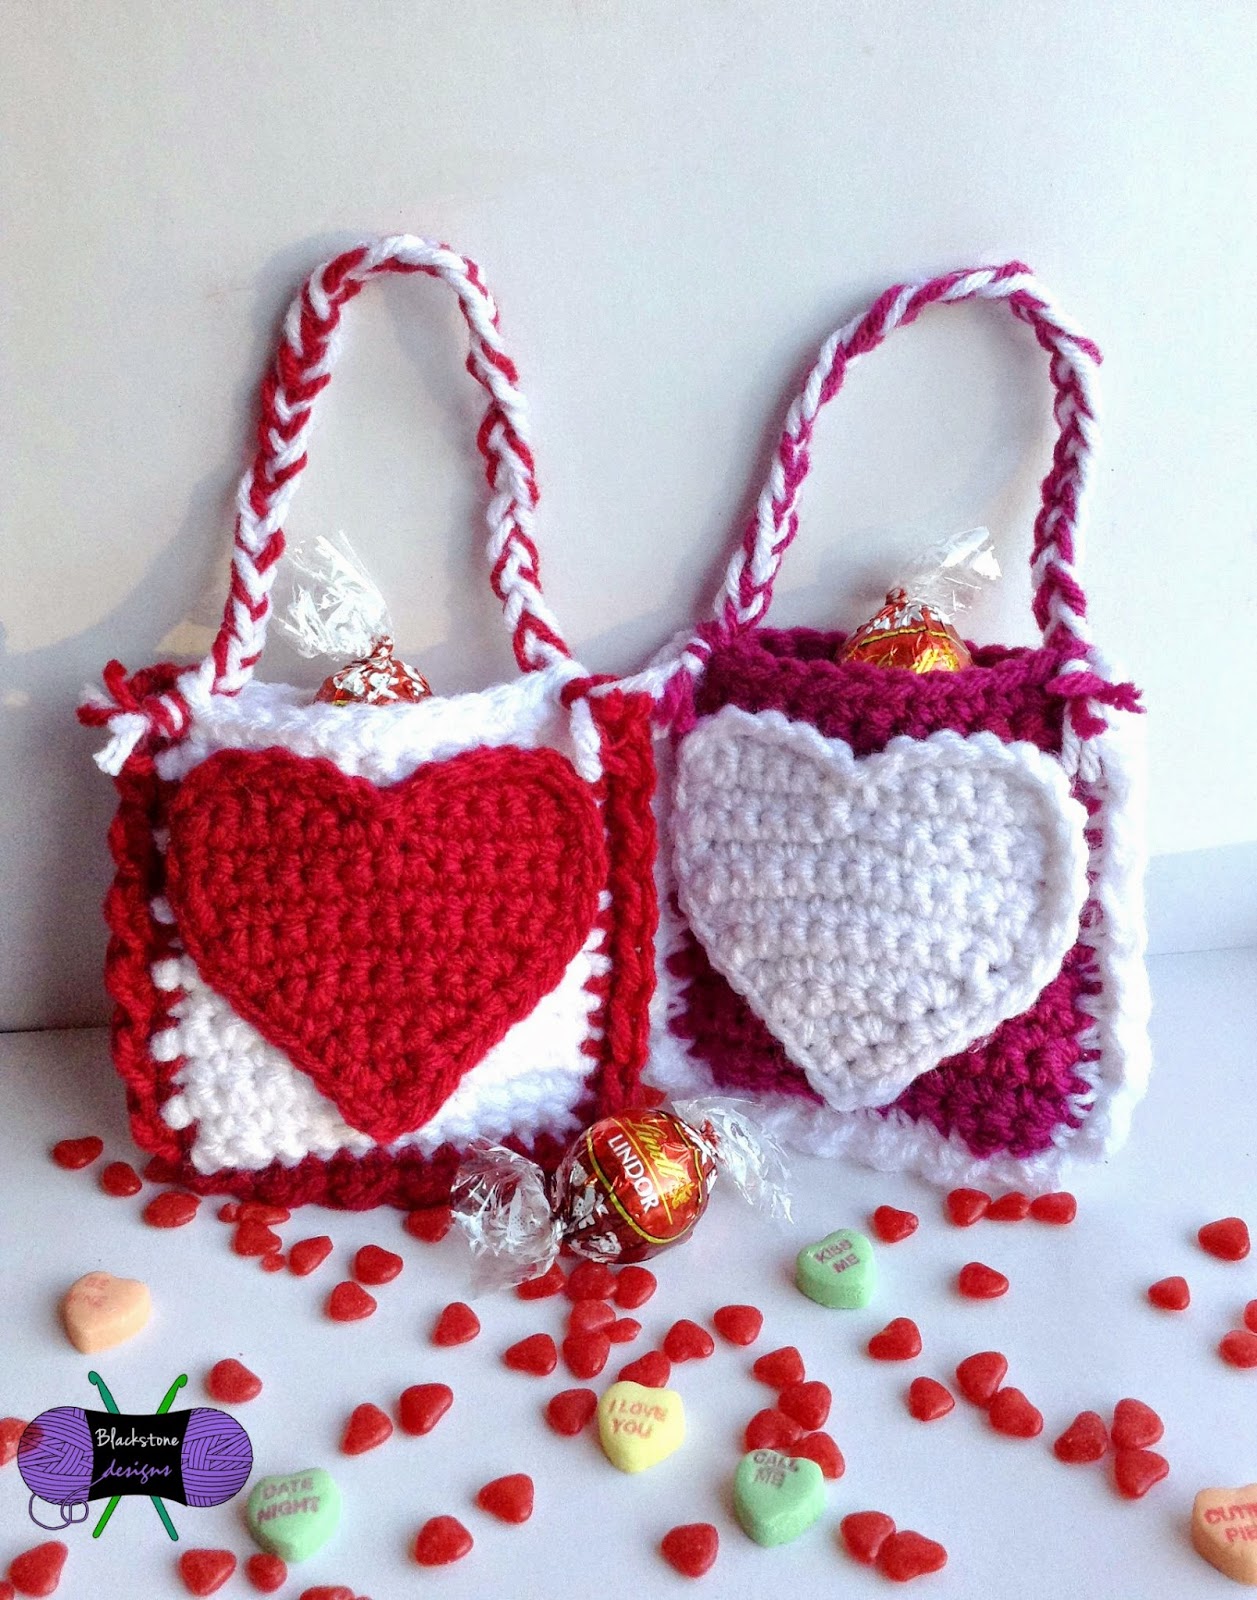 Crochet AF!: Valentine Gift Bags (and more!)